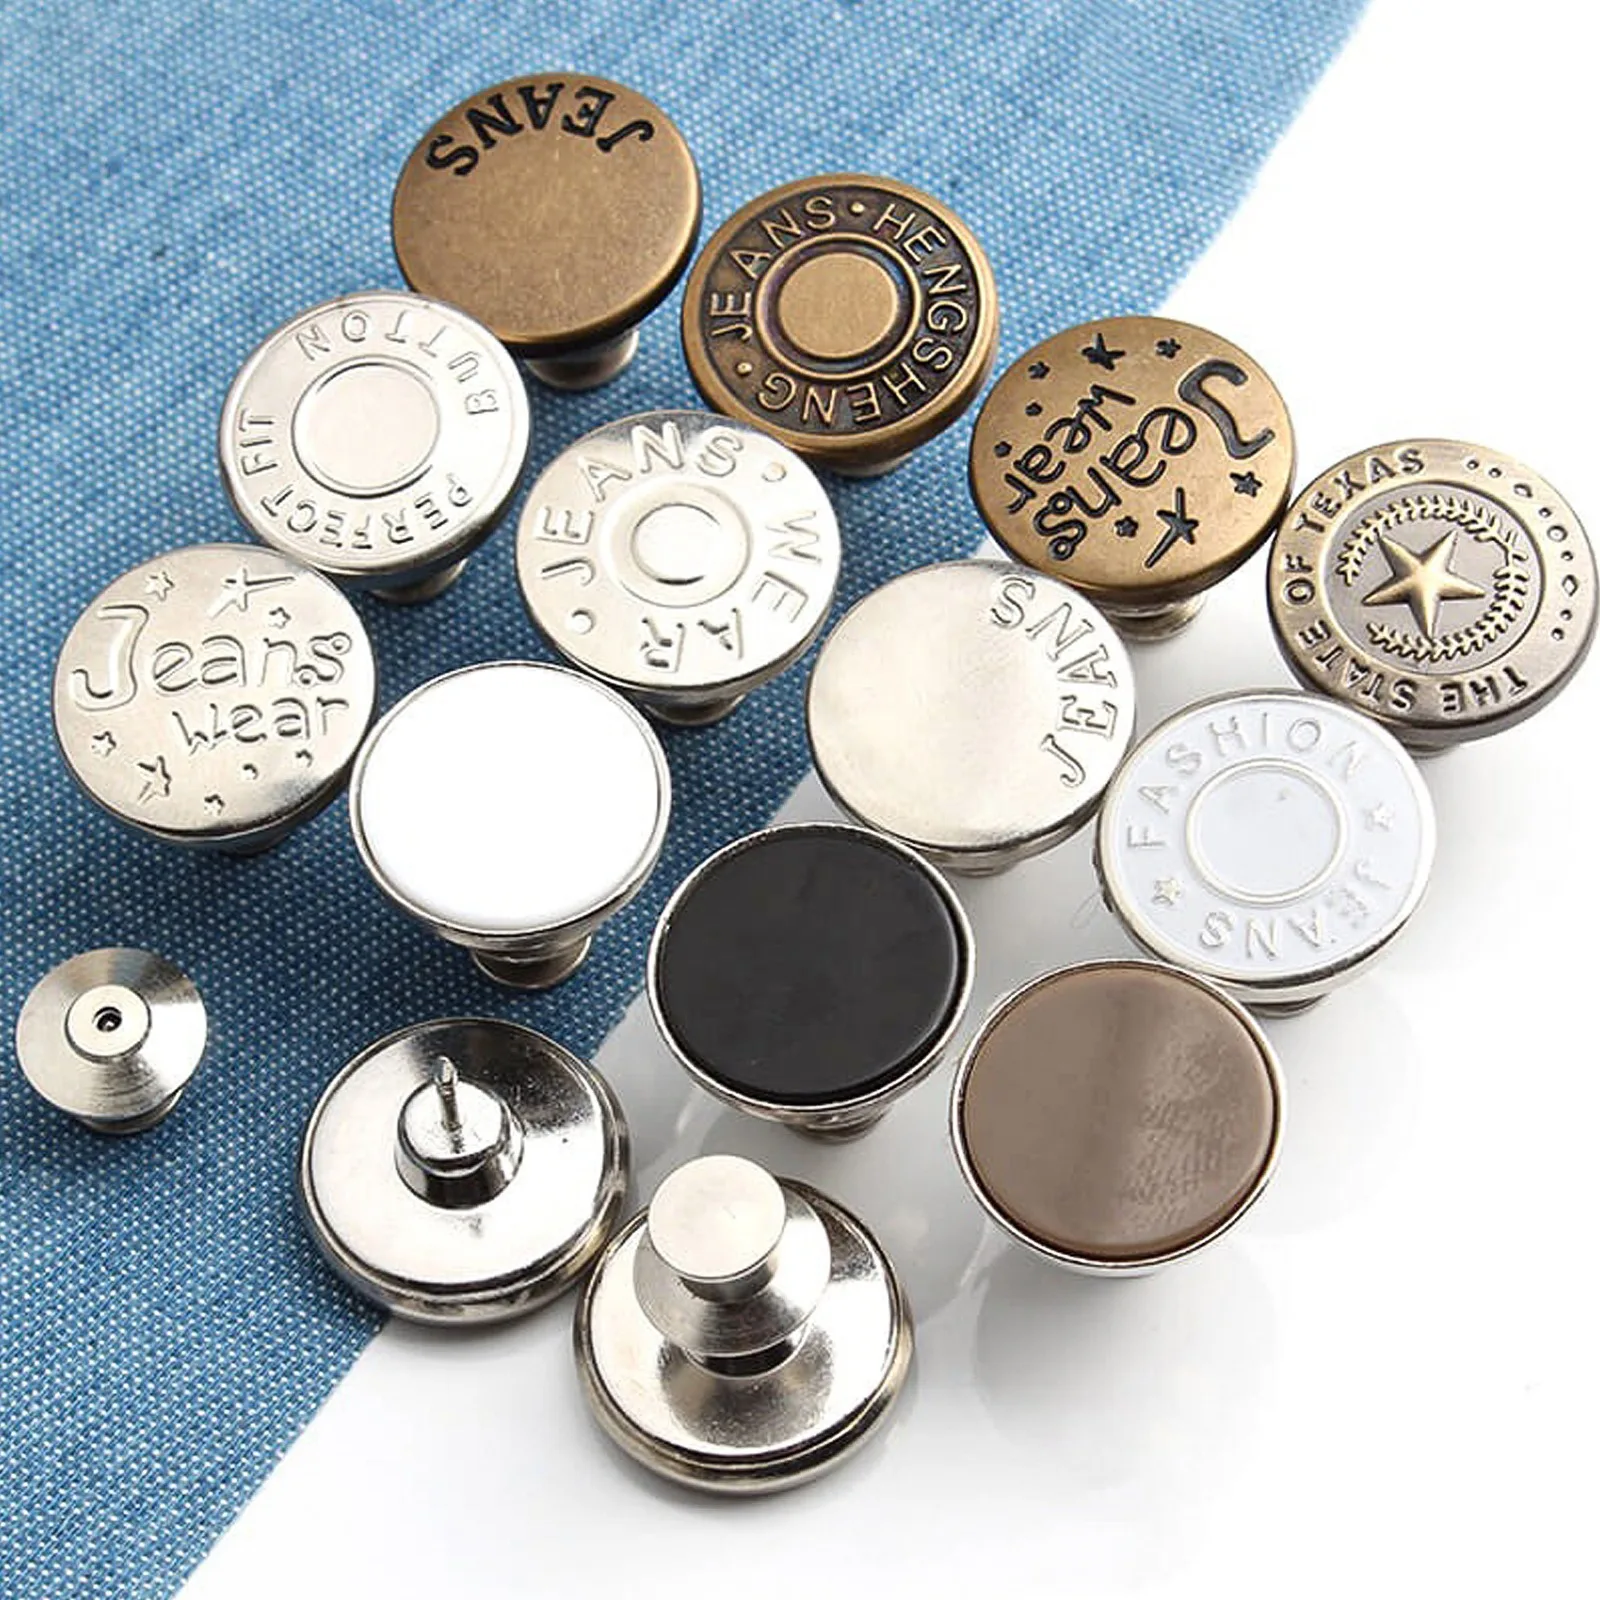 

Snap Fastener Metal Buttons For Clothing Jeans Perfect Fit Adjust Self Increase Reduce Waist Free Nail Twist Sewing Buttons